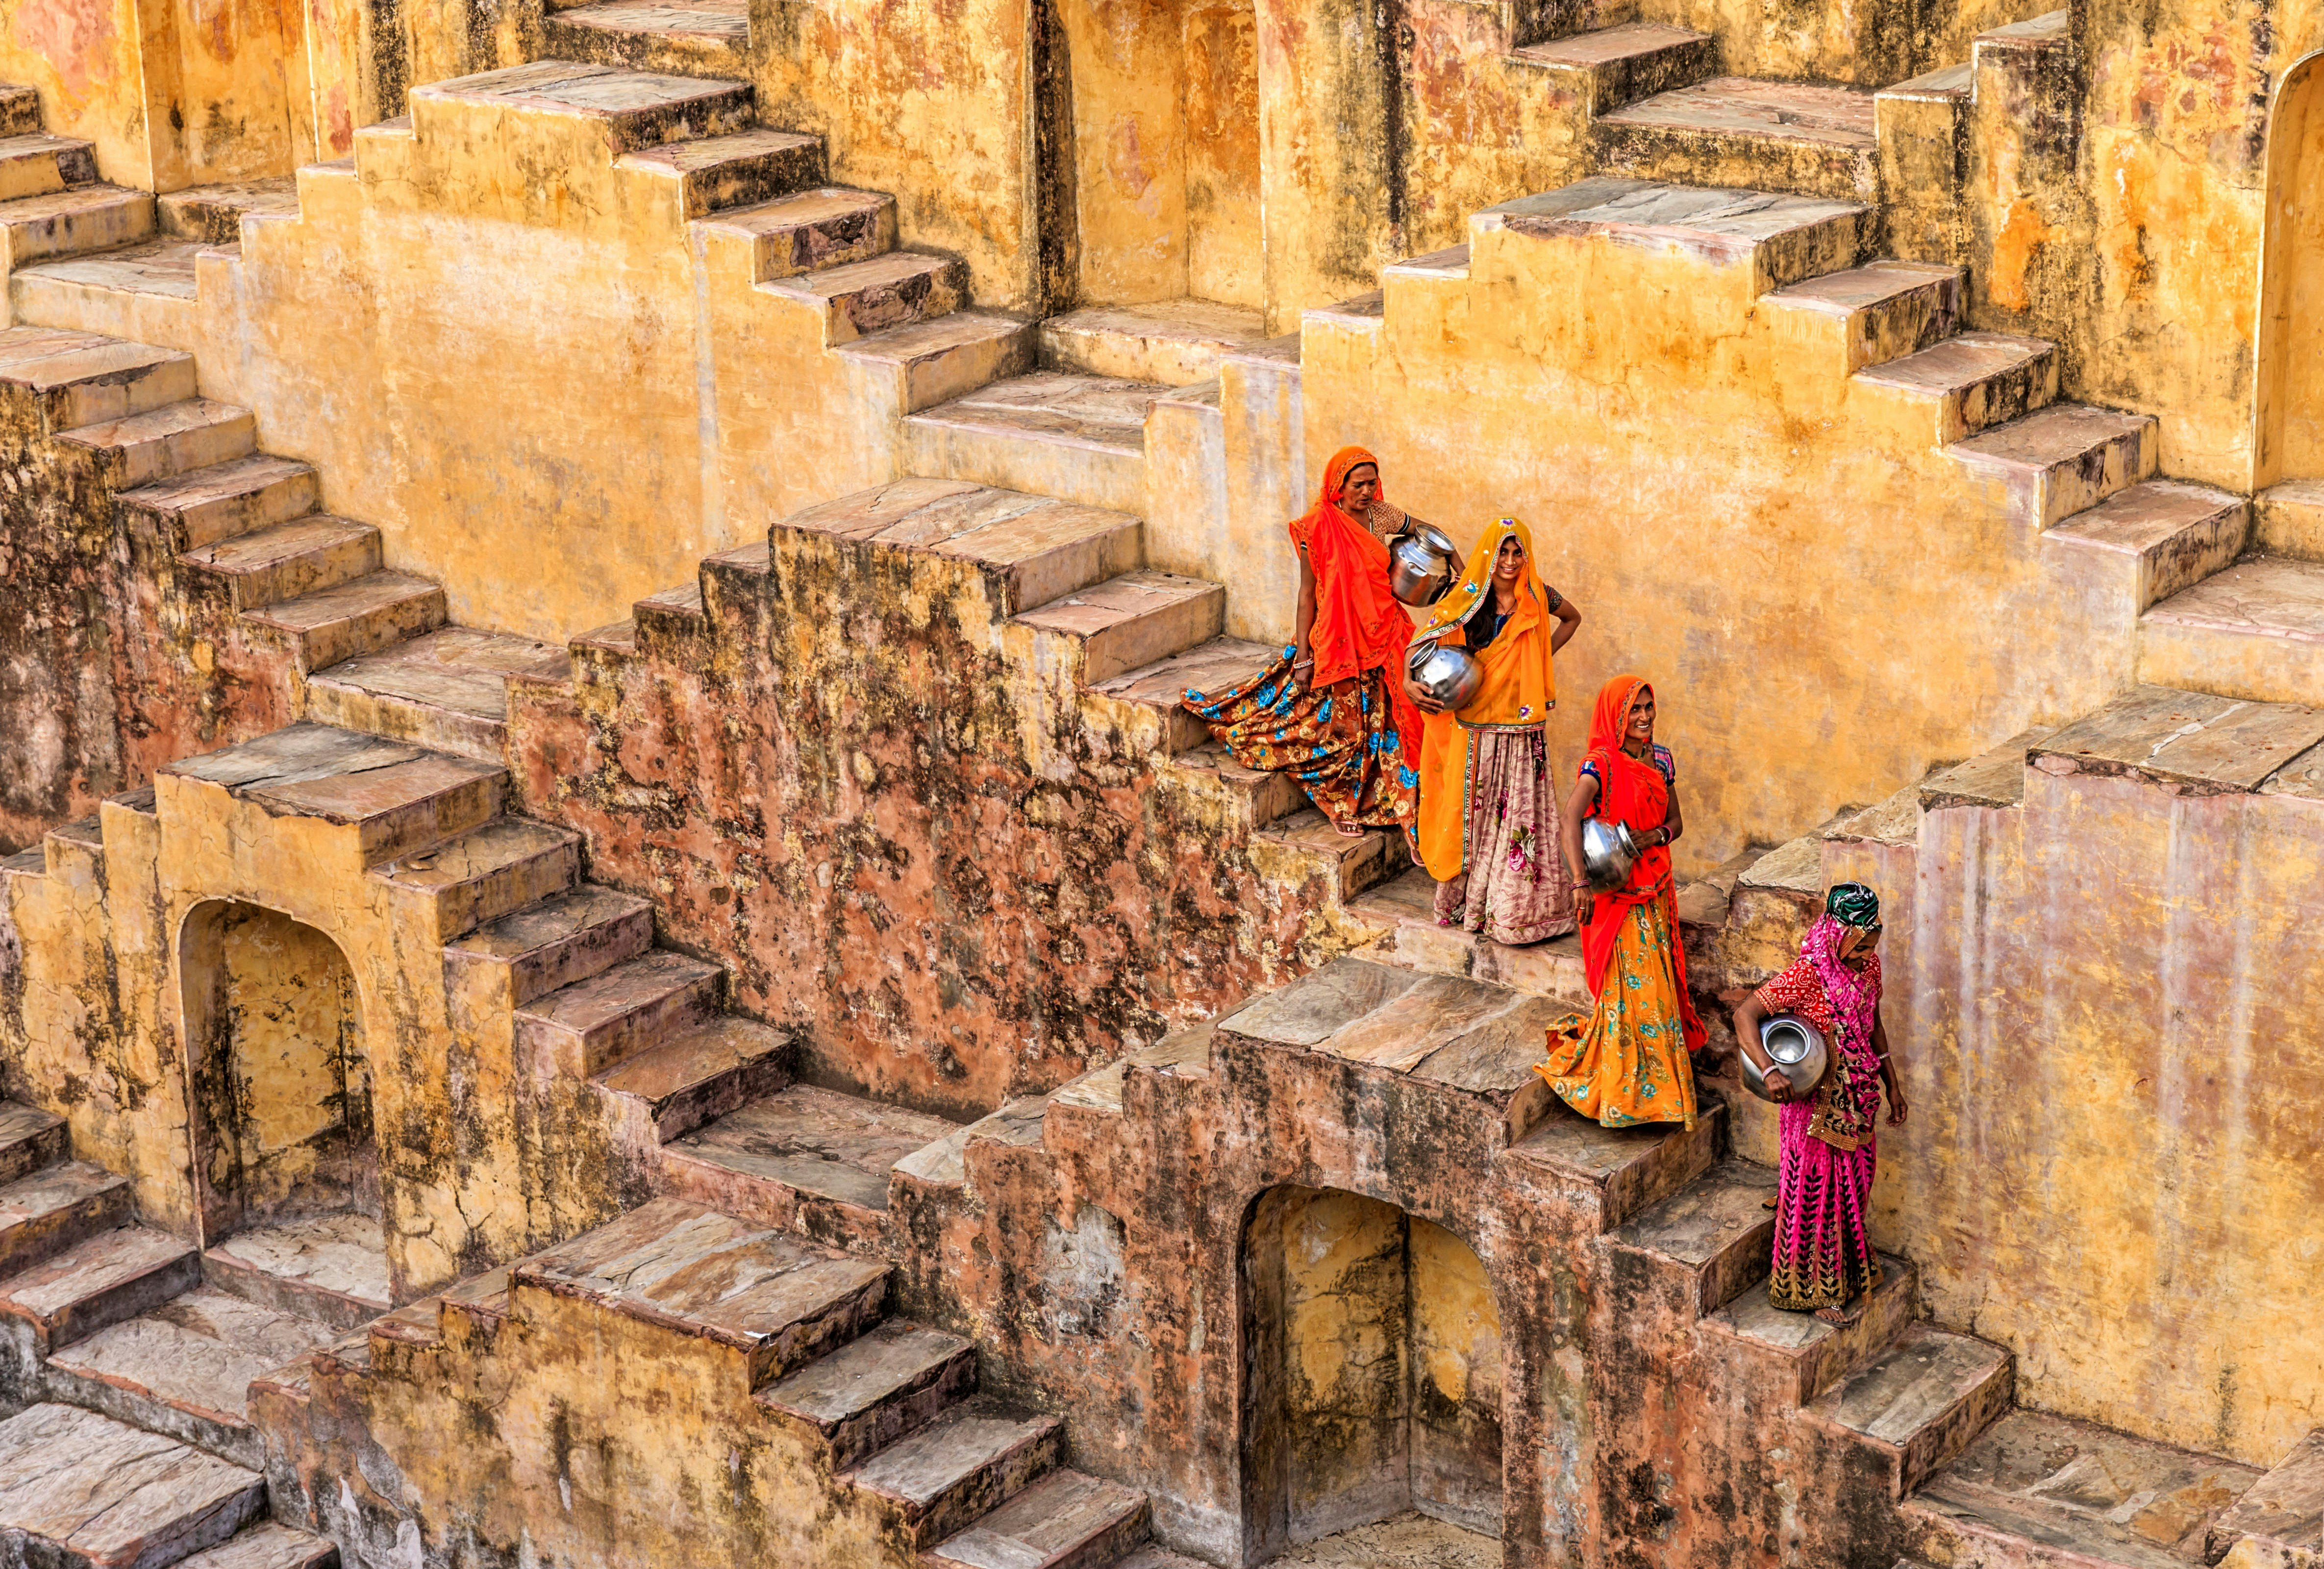 A posed picture of four women, carrying metallic pots, walking down the stairs of a stone stepwell in Rajasthan, India. The four women wear colourful saris that stand out against the stone background.